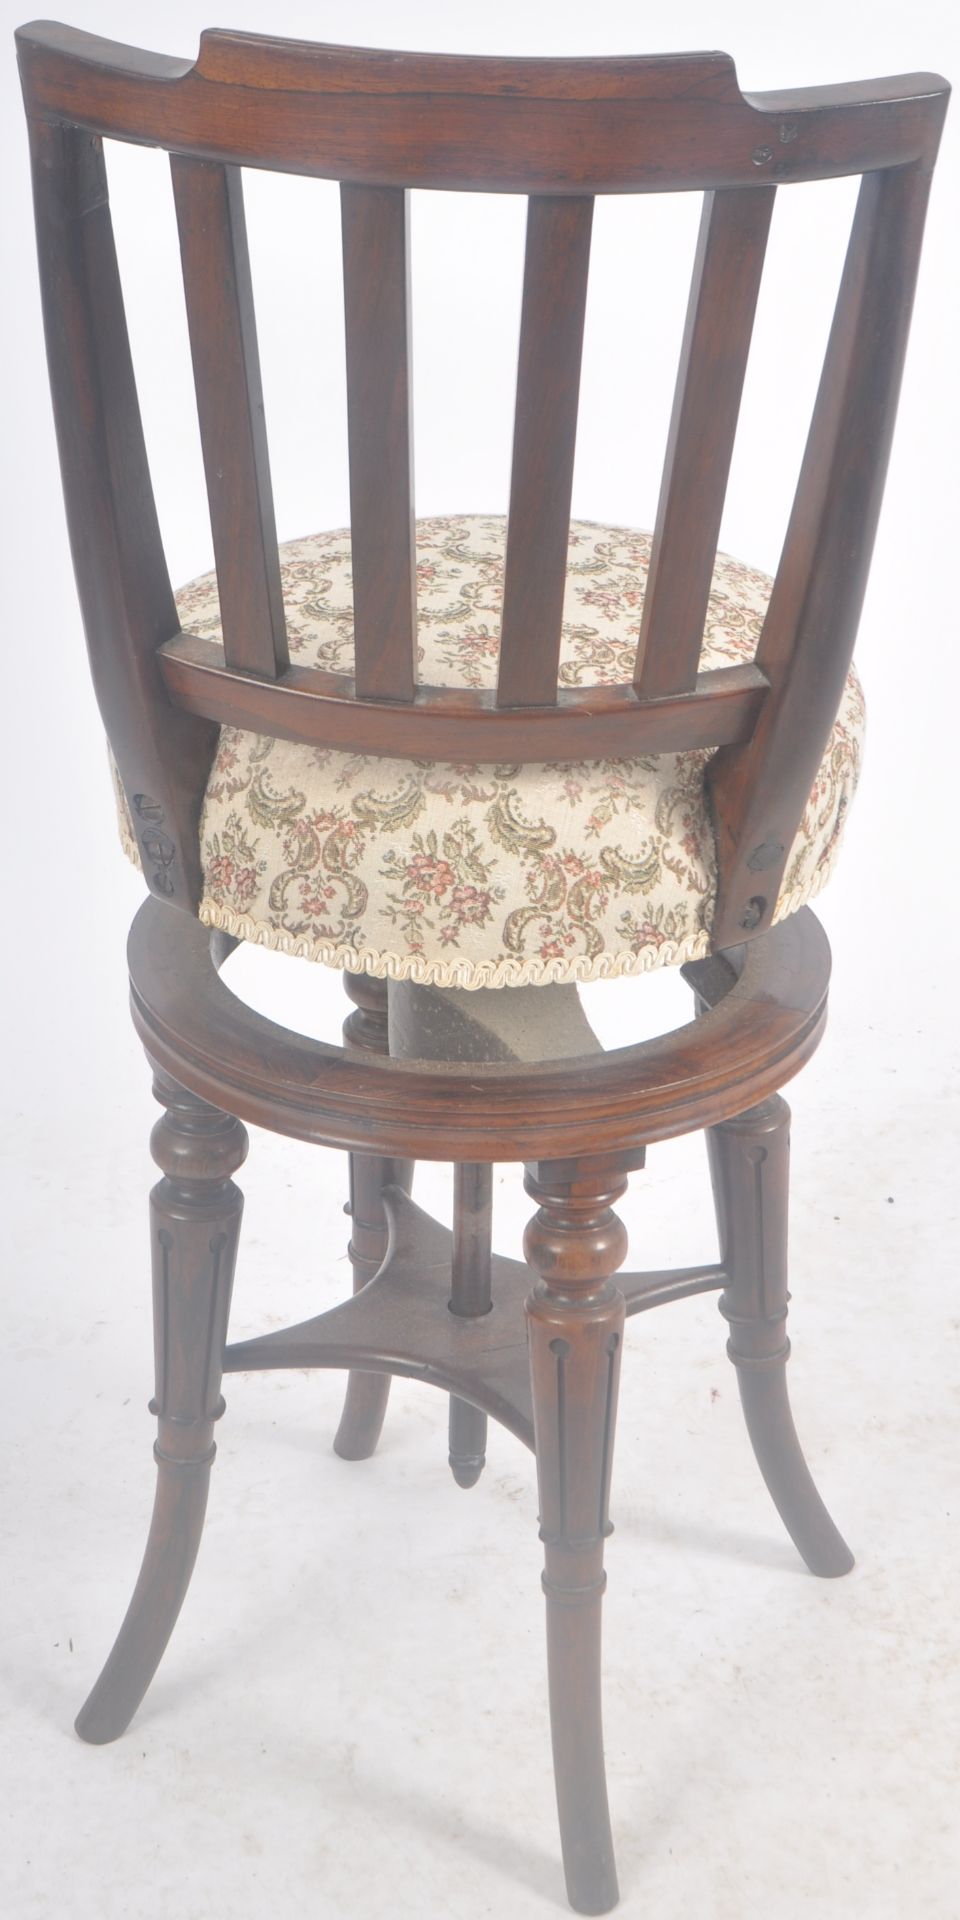 19TH CENTURY MANNER OF GILLOWS HARPISTS CHAIR - Image 5 of 6